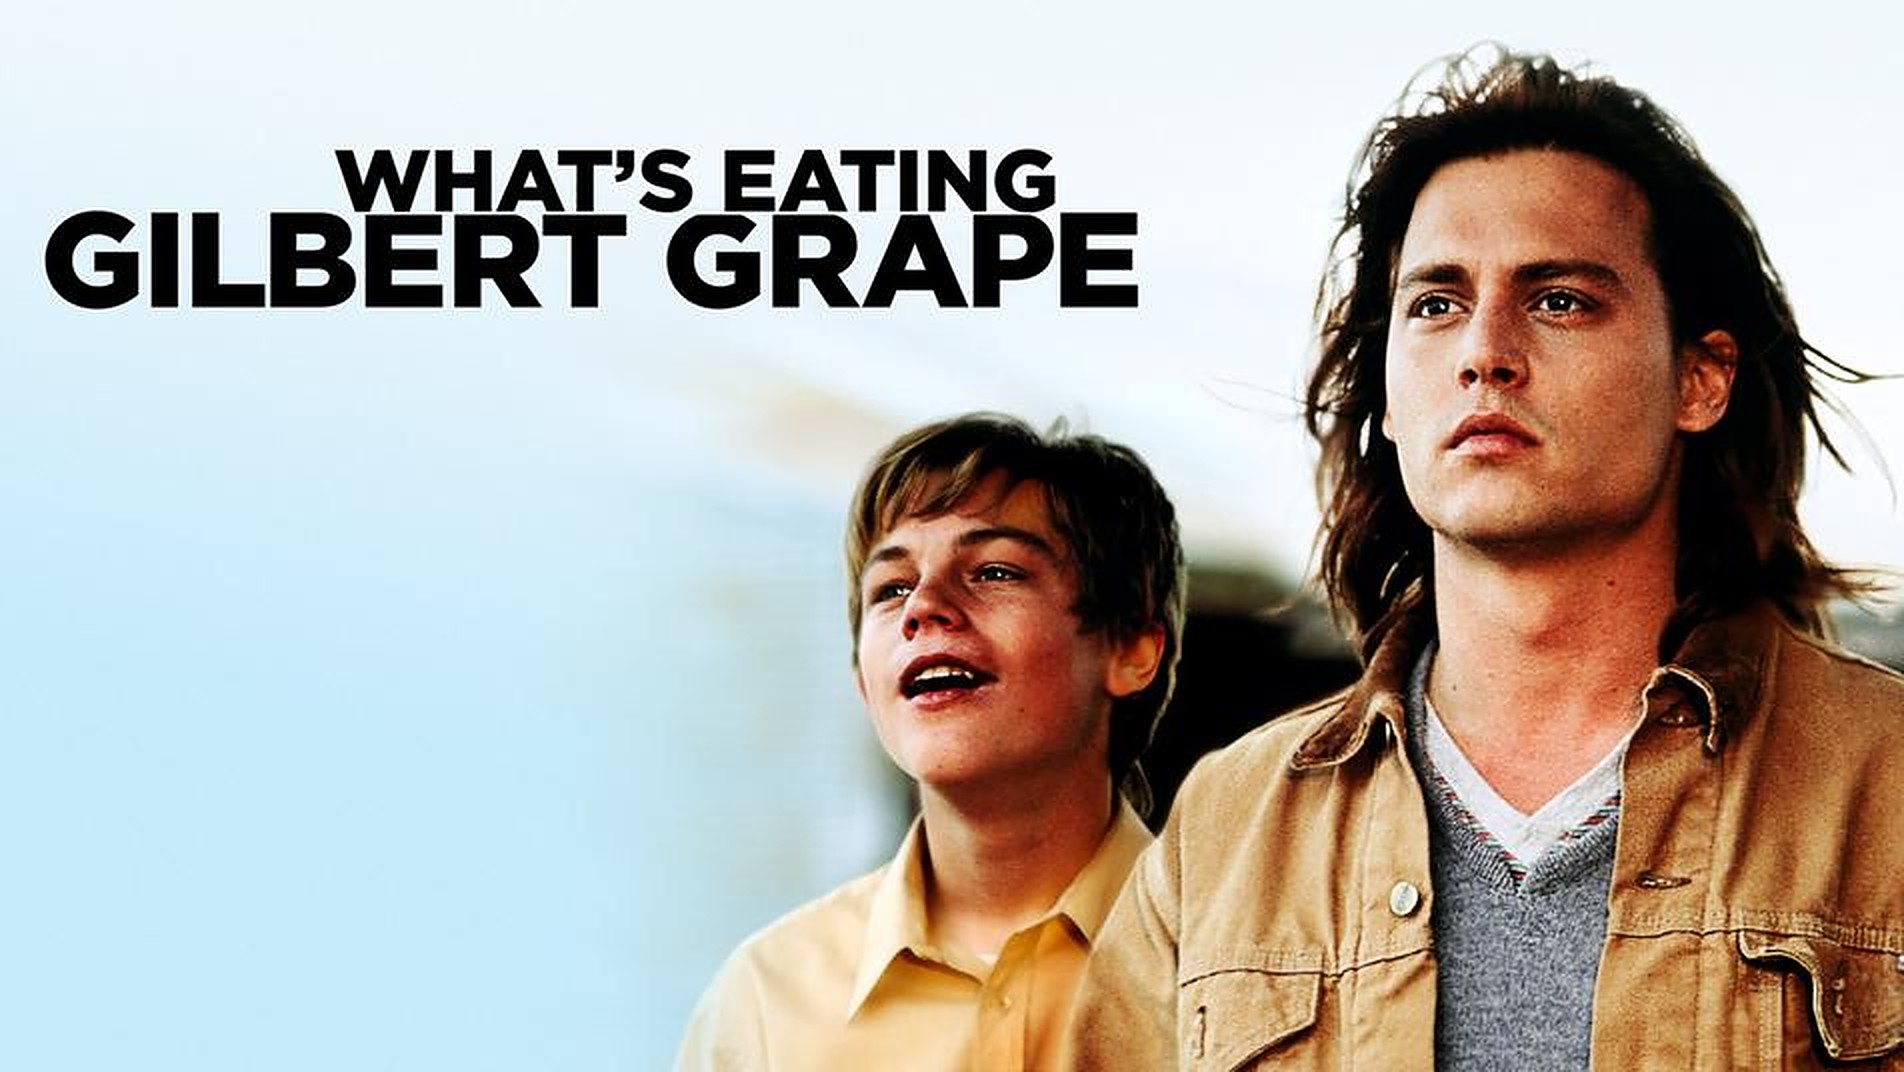 38-facts-about-the-movie-whats-eating-gilbert-grape